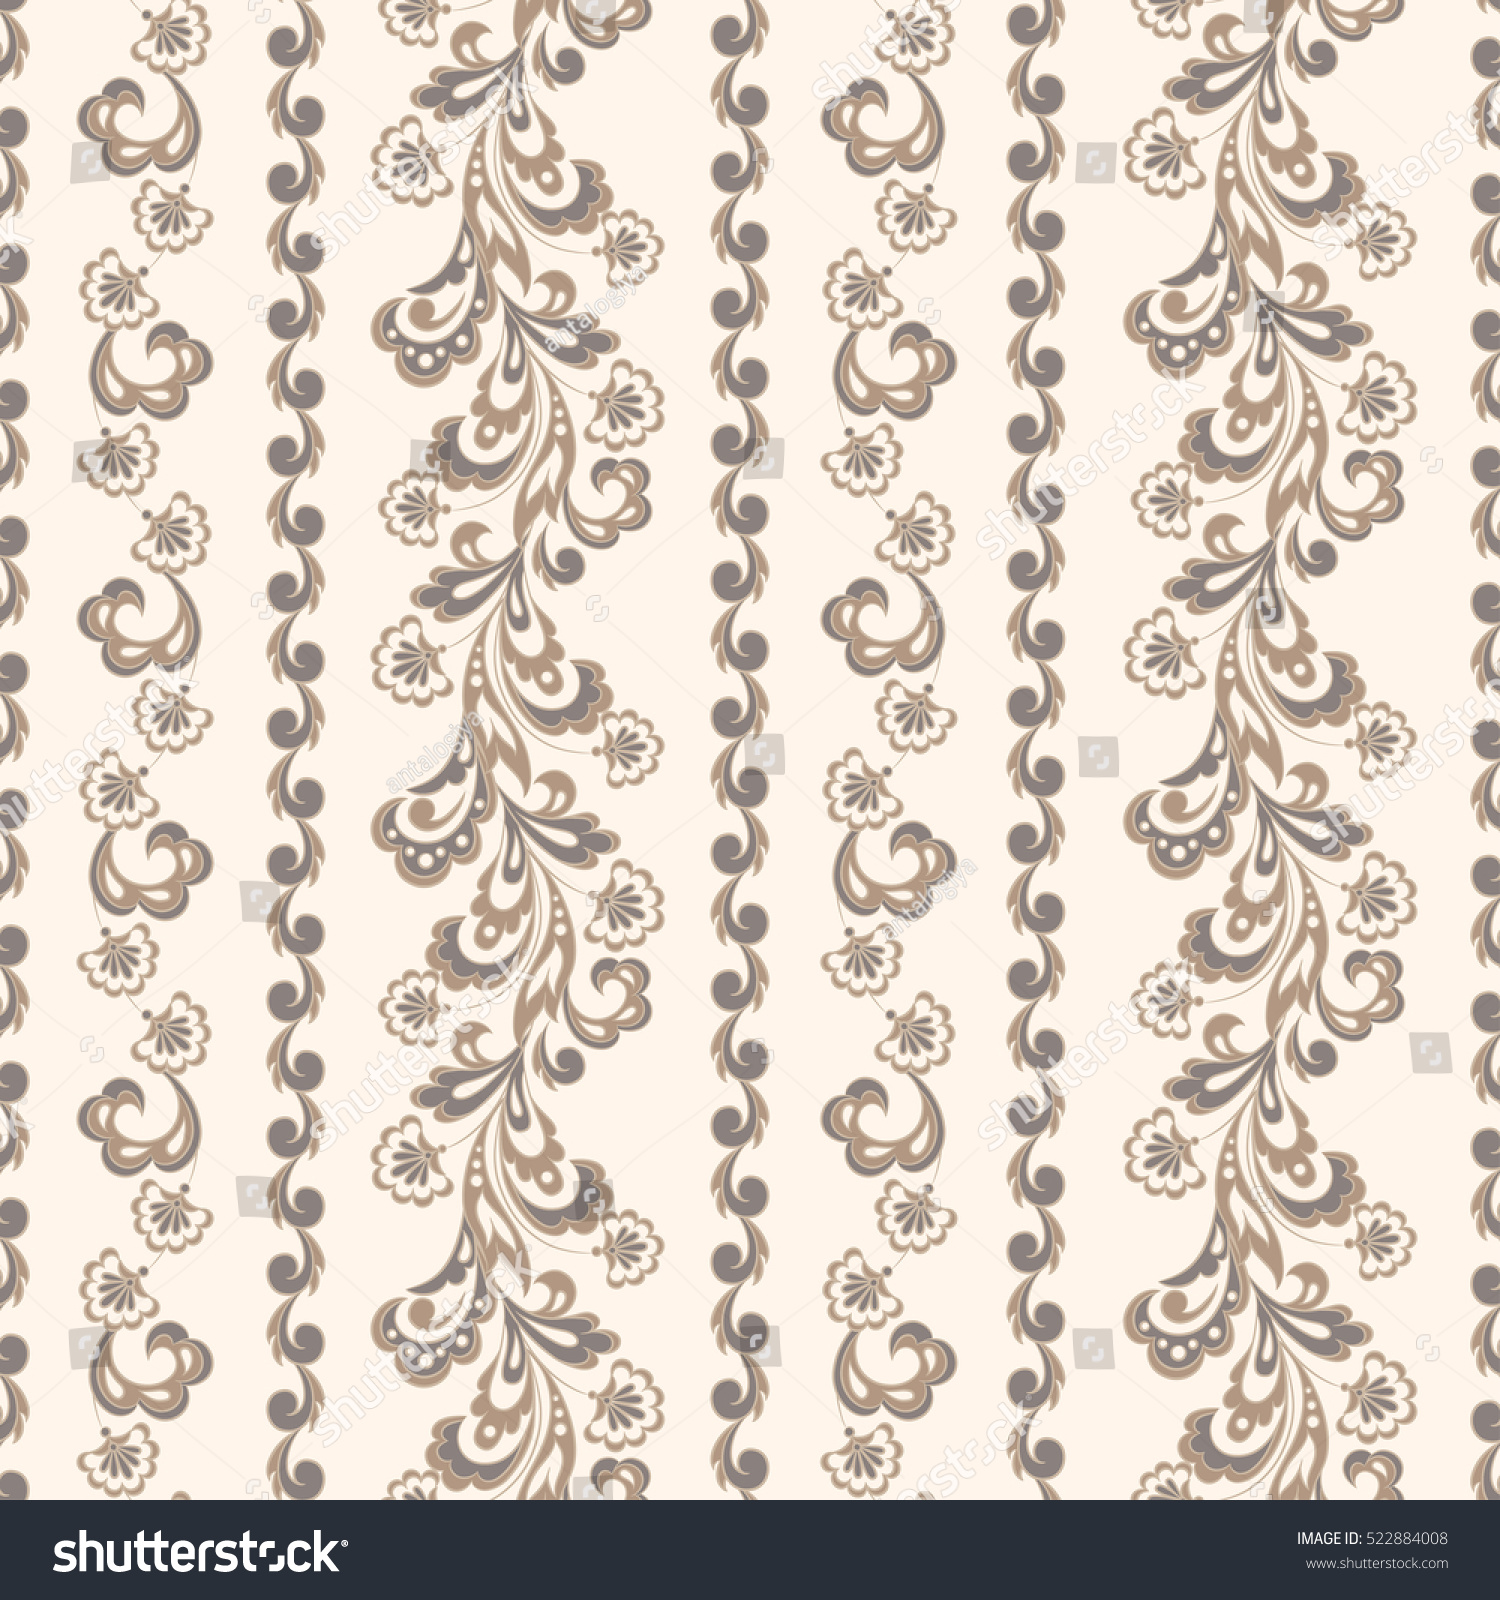 Striped seamless floral background with. Wallpaper vector Illustration #522884008